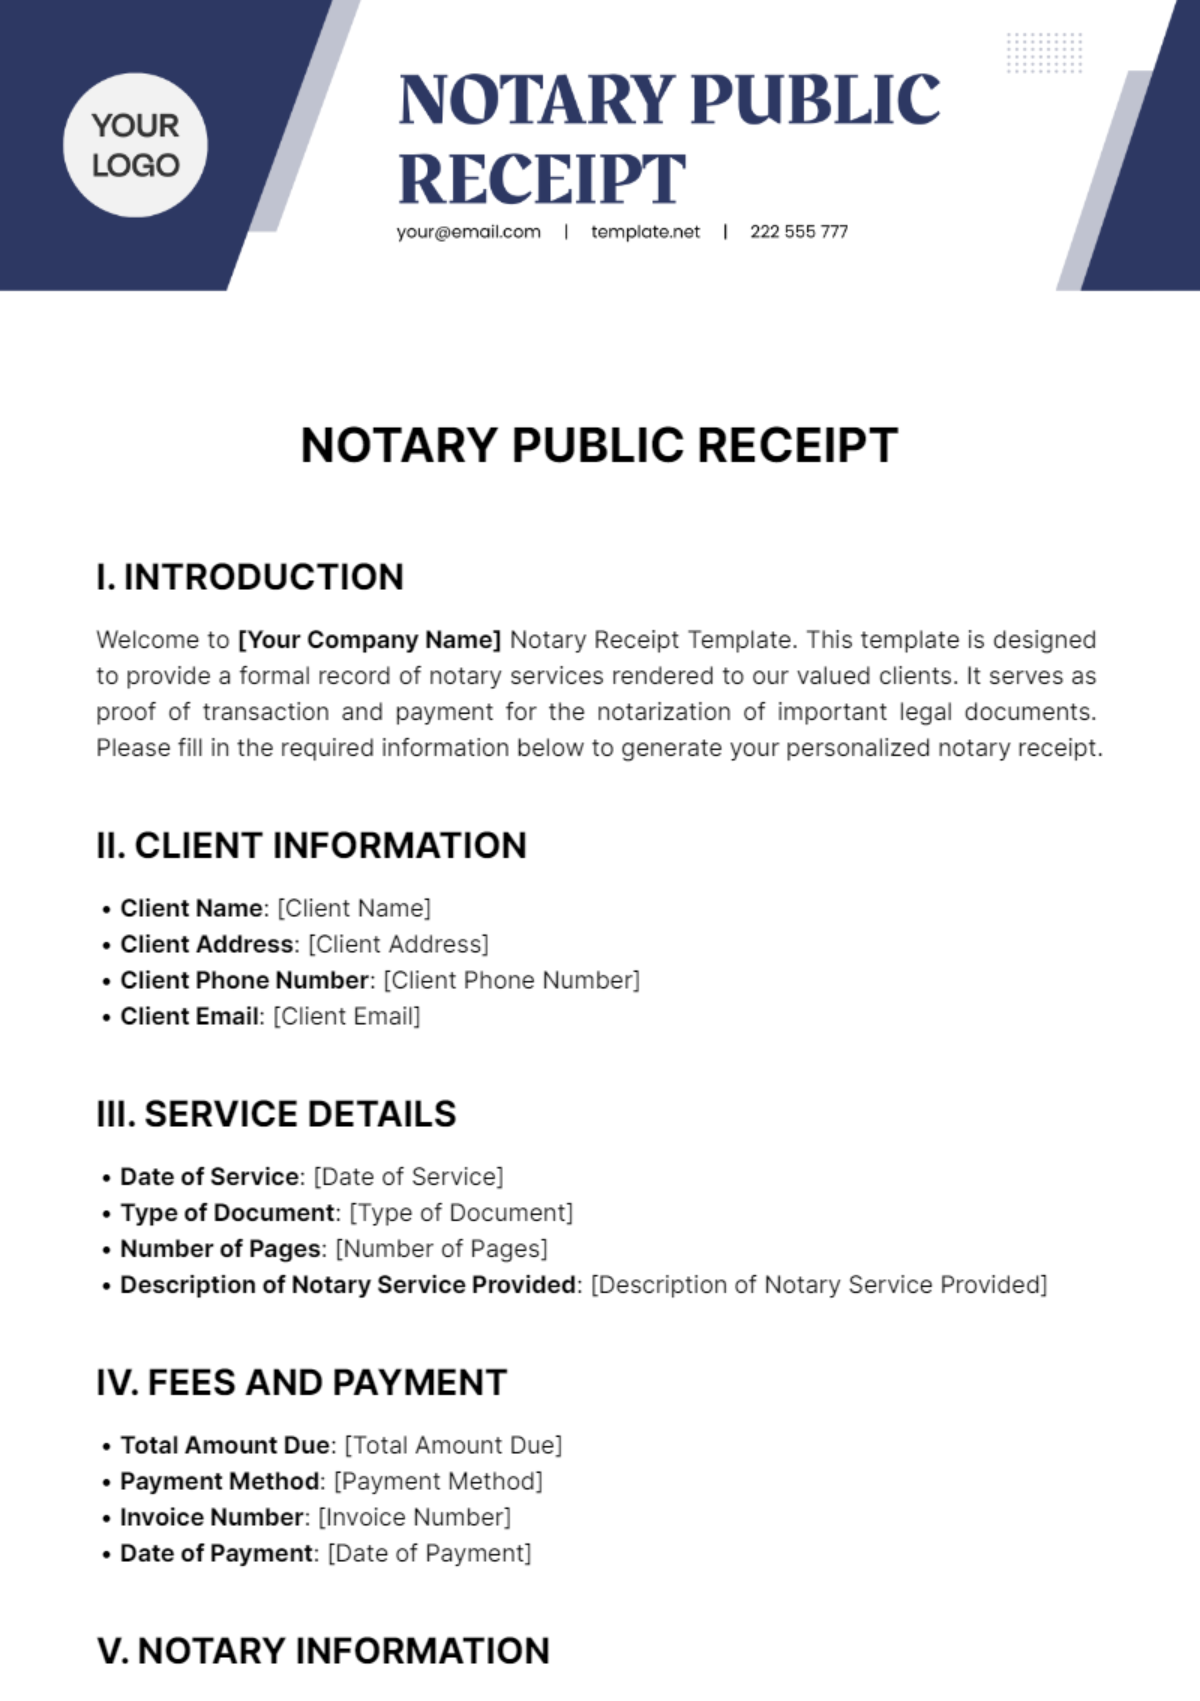 Free Notary Public Receipt Template